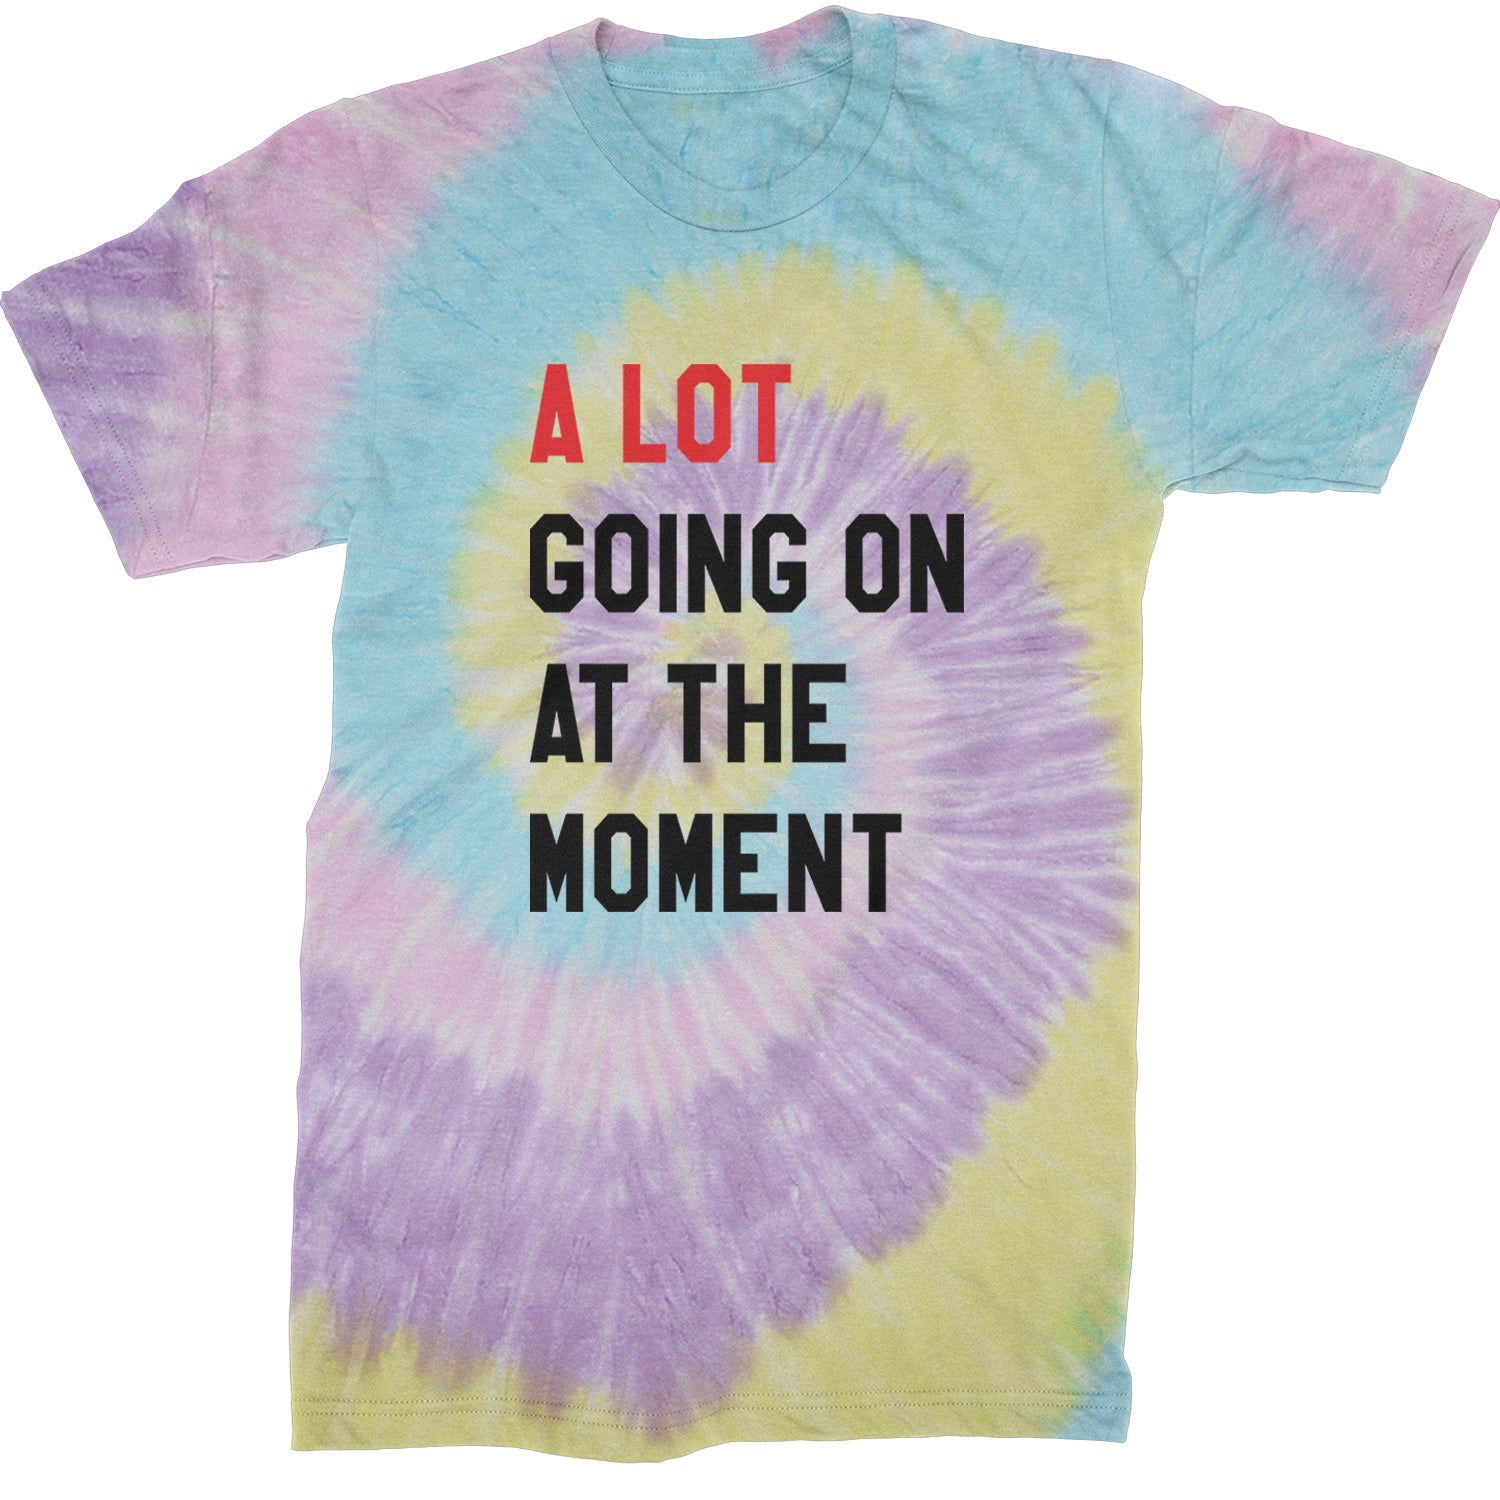 A Lot Going On At The Moment New TTPD Poet Department Mens T-shirt Tie-Dye Jellybean